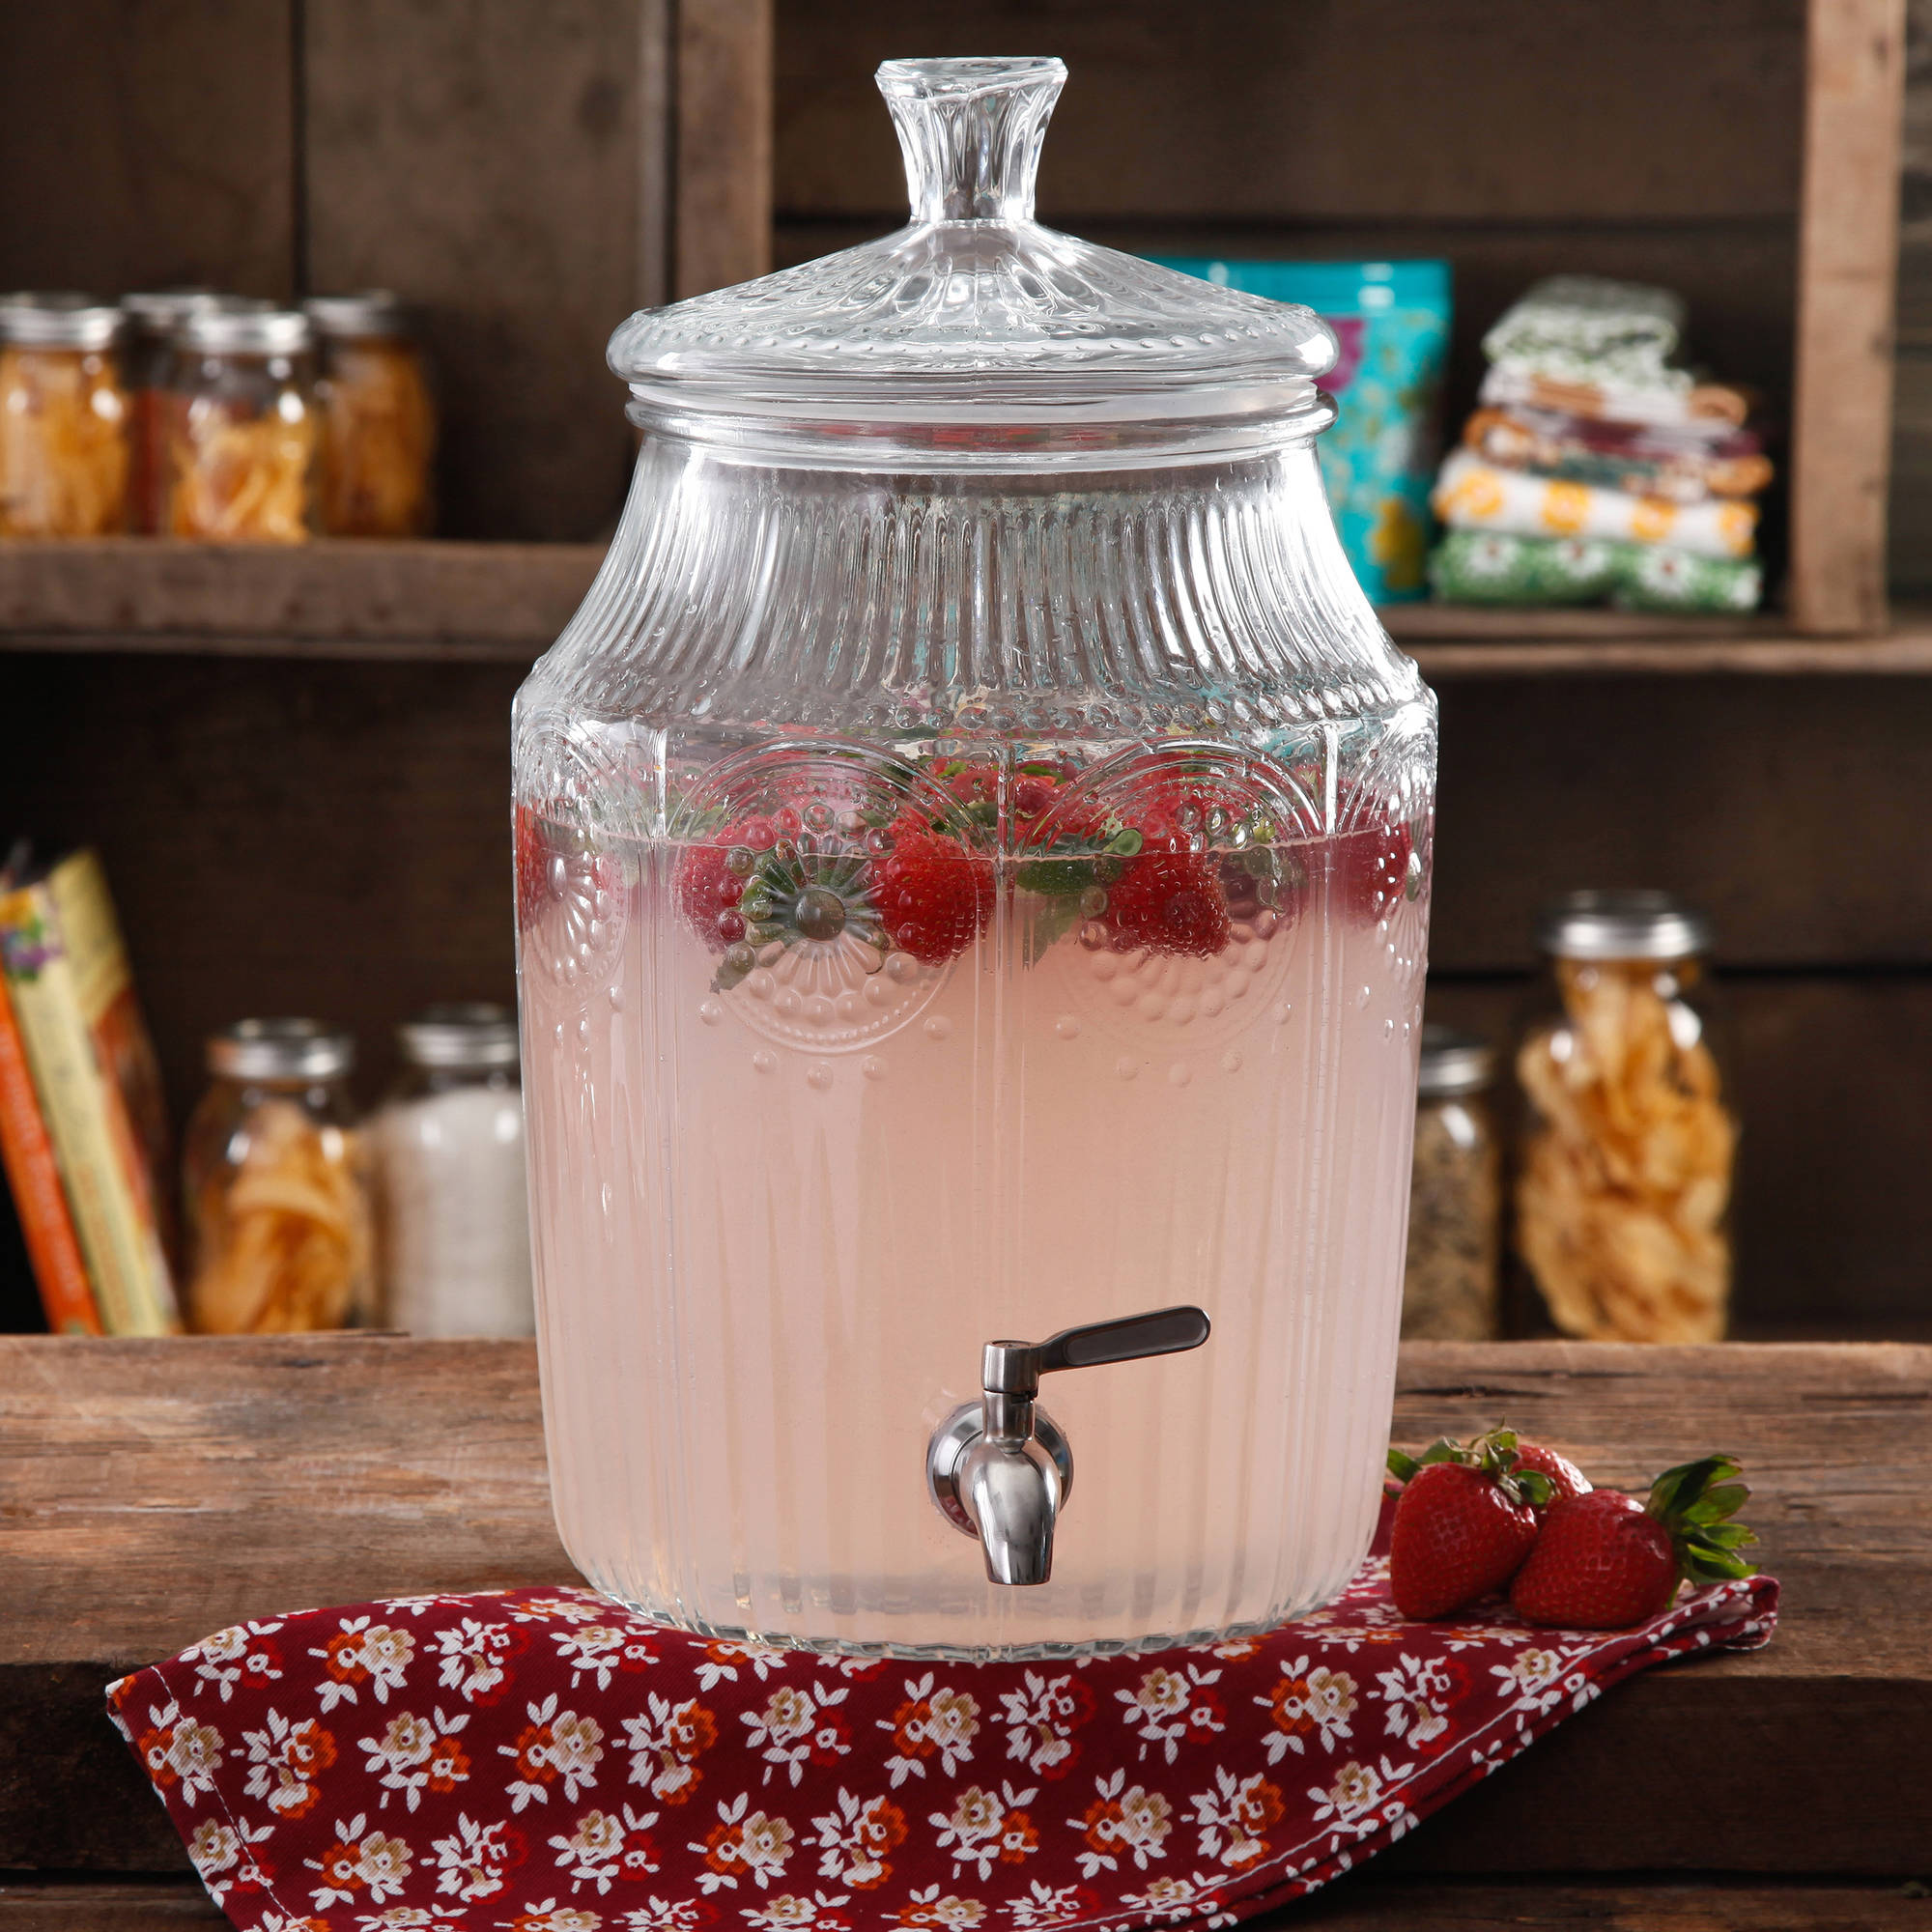 The Pioneer Woman Adeline 2.1-Gallon Glass Drink Dispenser - image 1 of 2